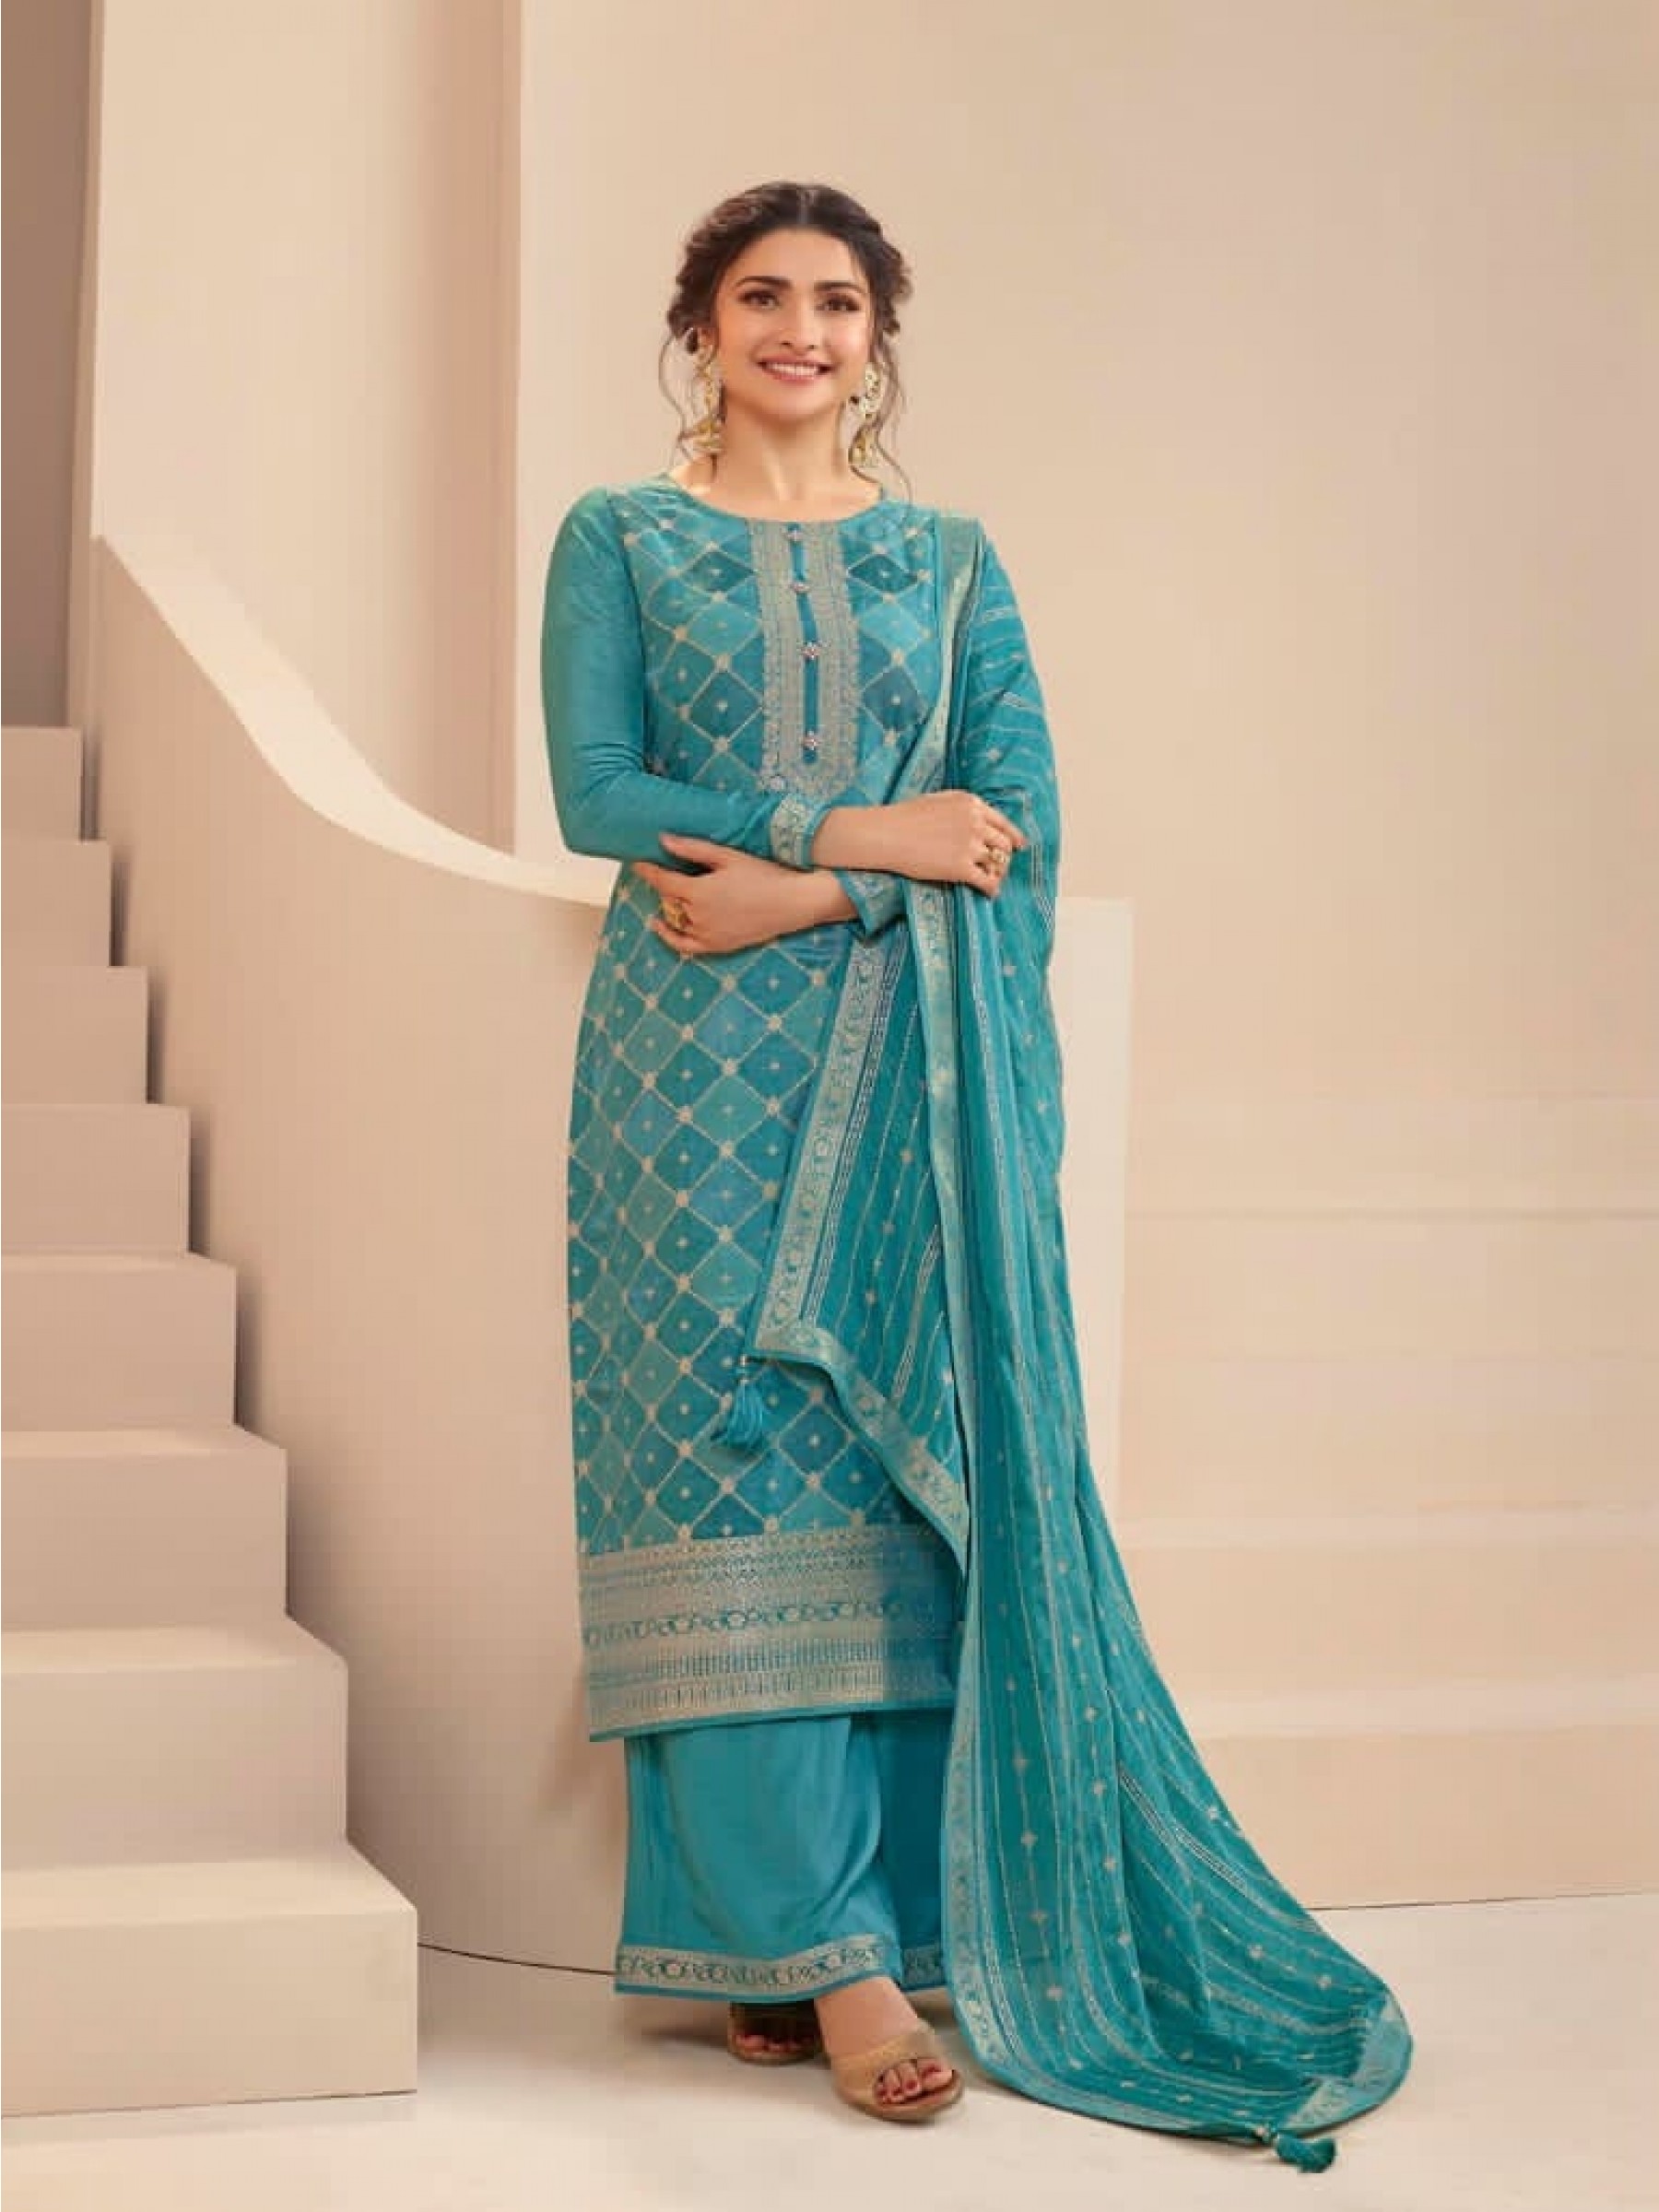 Pure Dola Jacquard Silk Party Wear Suit in Sea Blue Color with Embroidery Work